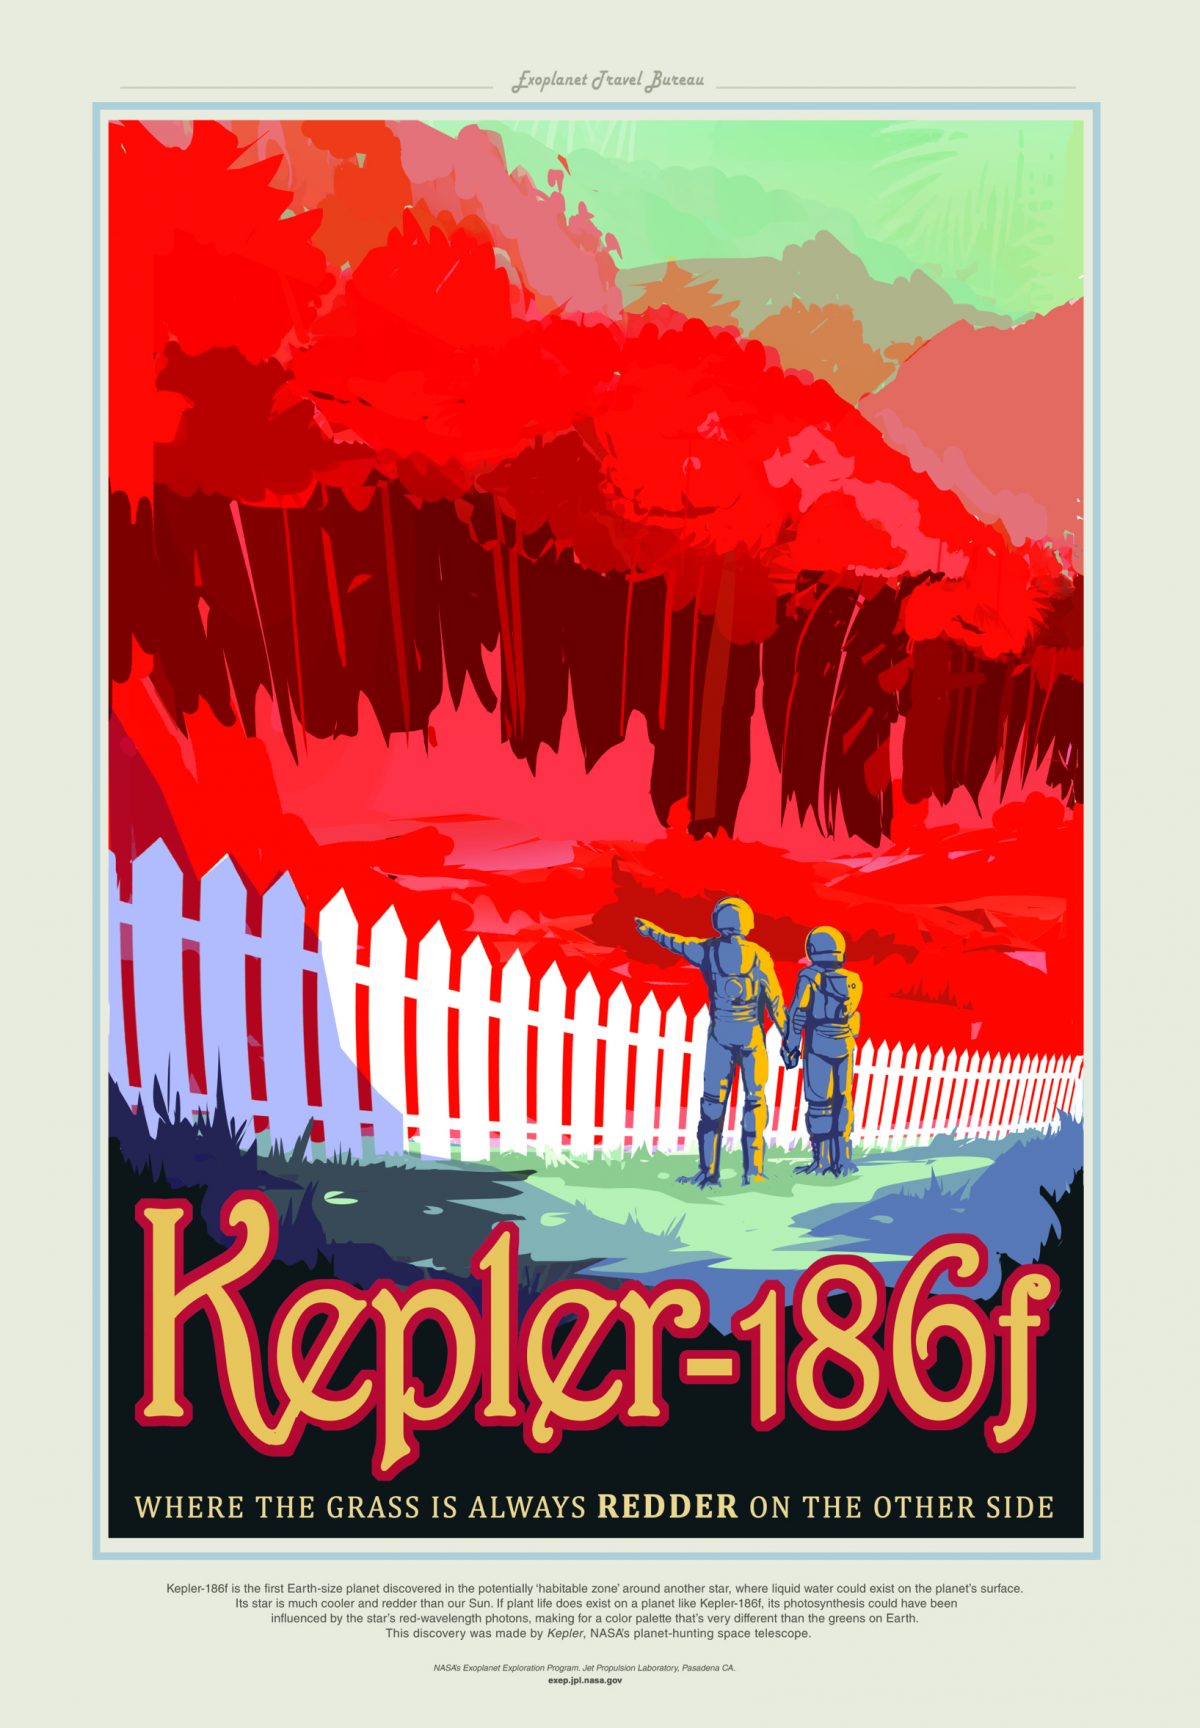 Kepler-186f is the first Earth-size planet discovered in the potentially 'habitable zone' around another star, where liquid water could exist on the planet's surface. Its star is much cooler and redder than our Sun. If plant life does exist on a planet like Kepler-186f, its photosynthesis could have been influenced by the star's red-wavelength photons, making for a color palette that's very different than the greens on Earth. This discovery was made by Kepler, NASA's planet hunting telescope.